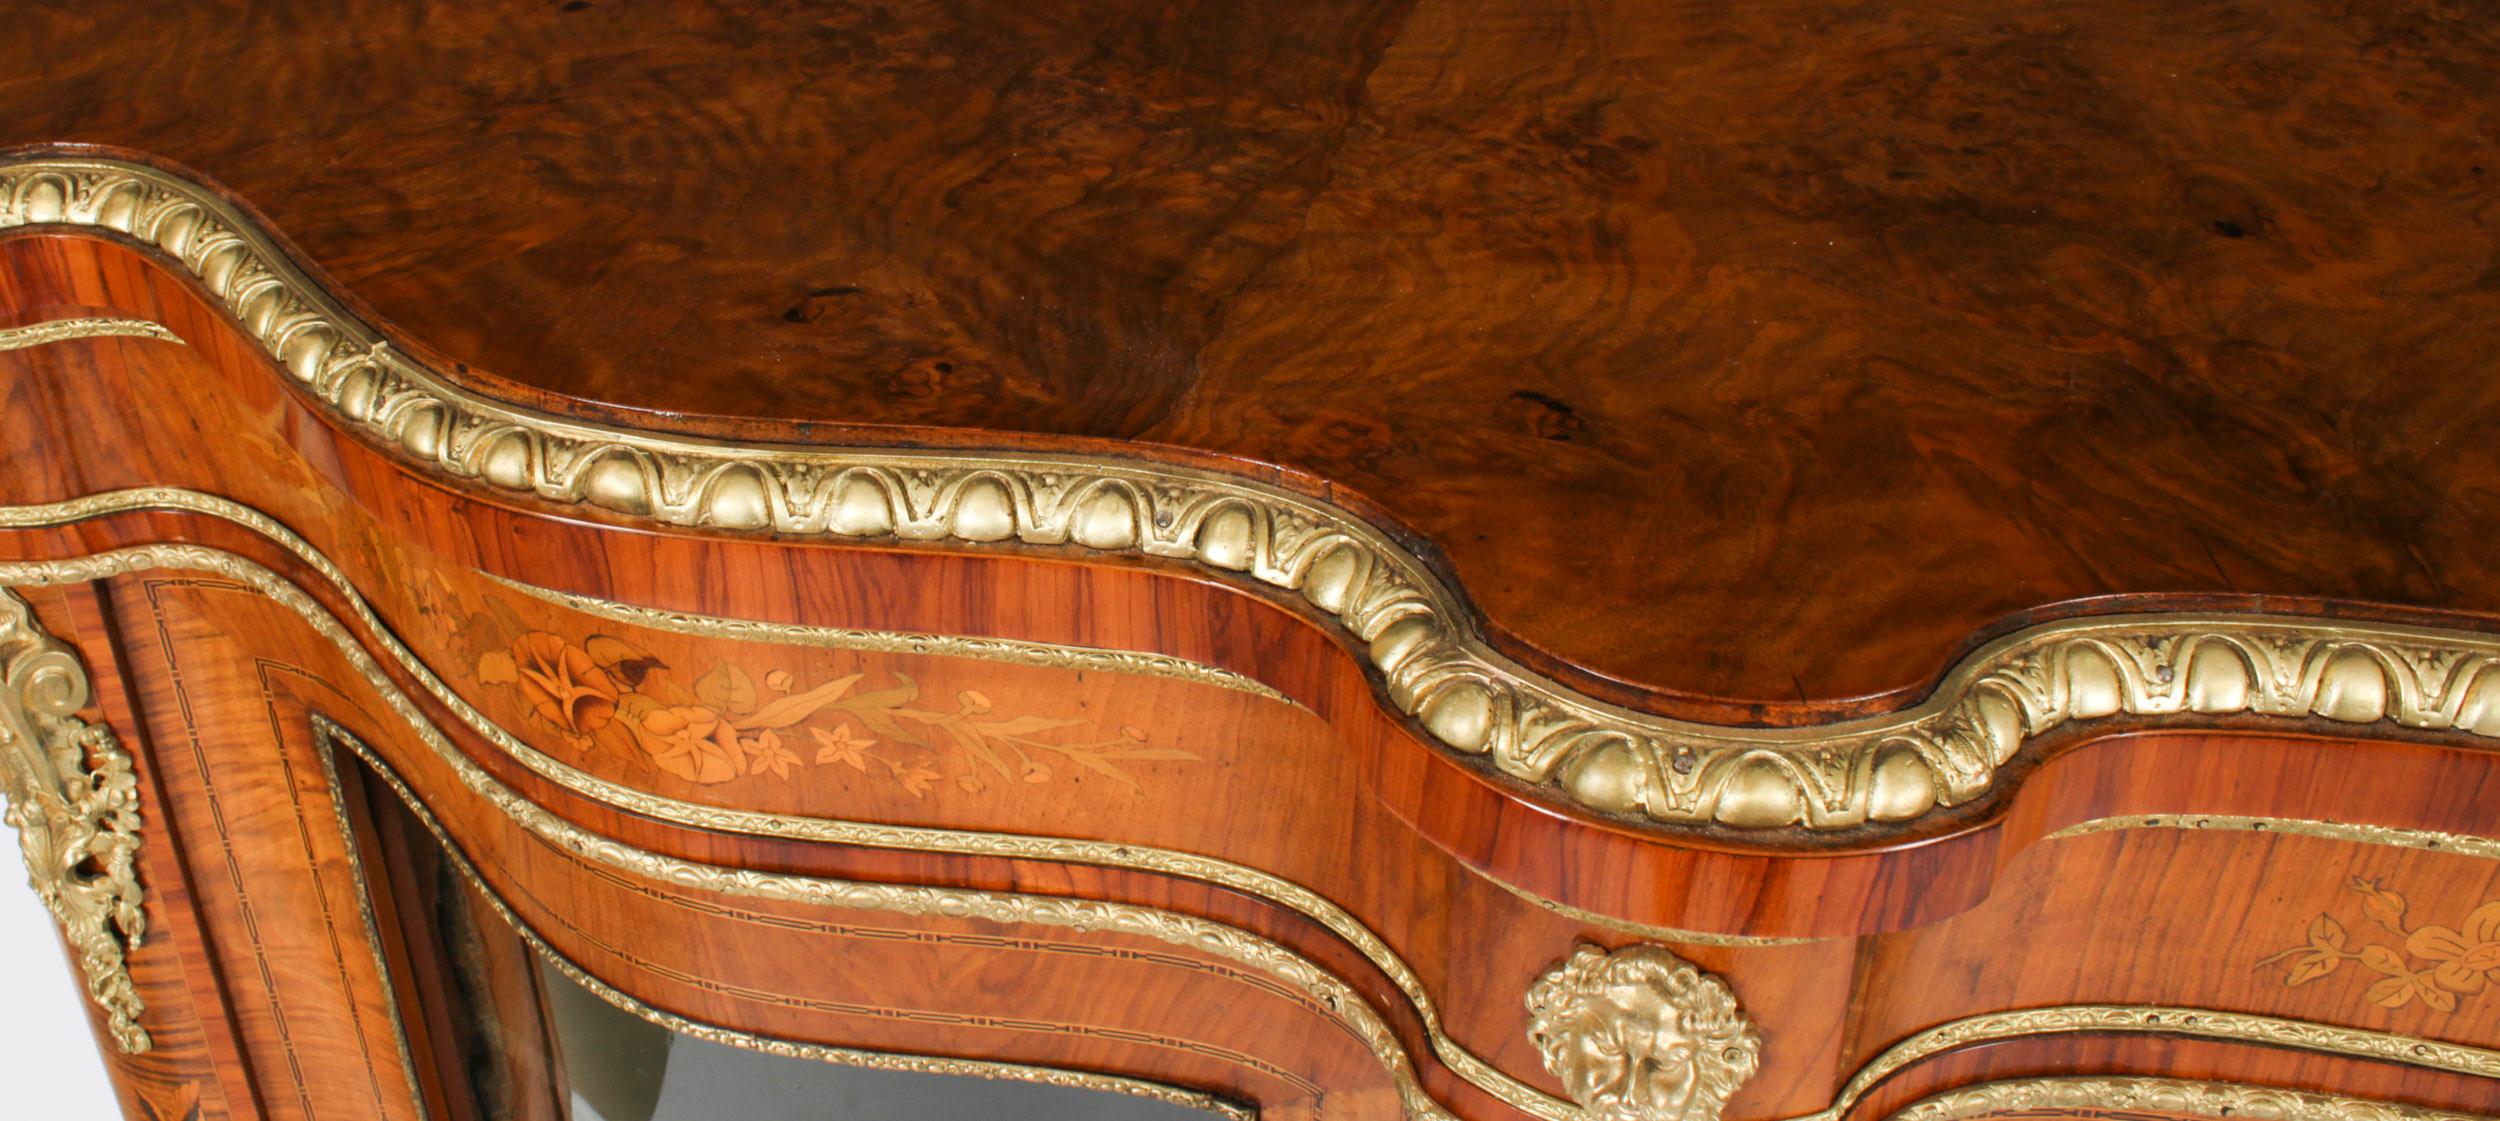 Mid-19th Century Antique Large Ormolu Mounted Walnut & Marquetry Serpentine Credenza 19th C For Sale